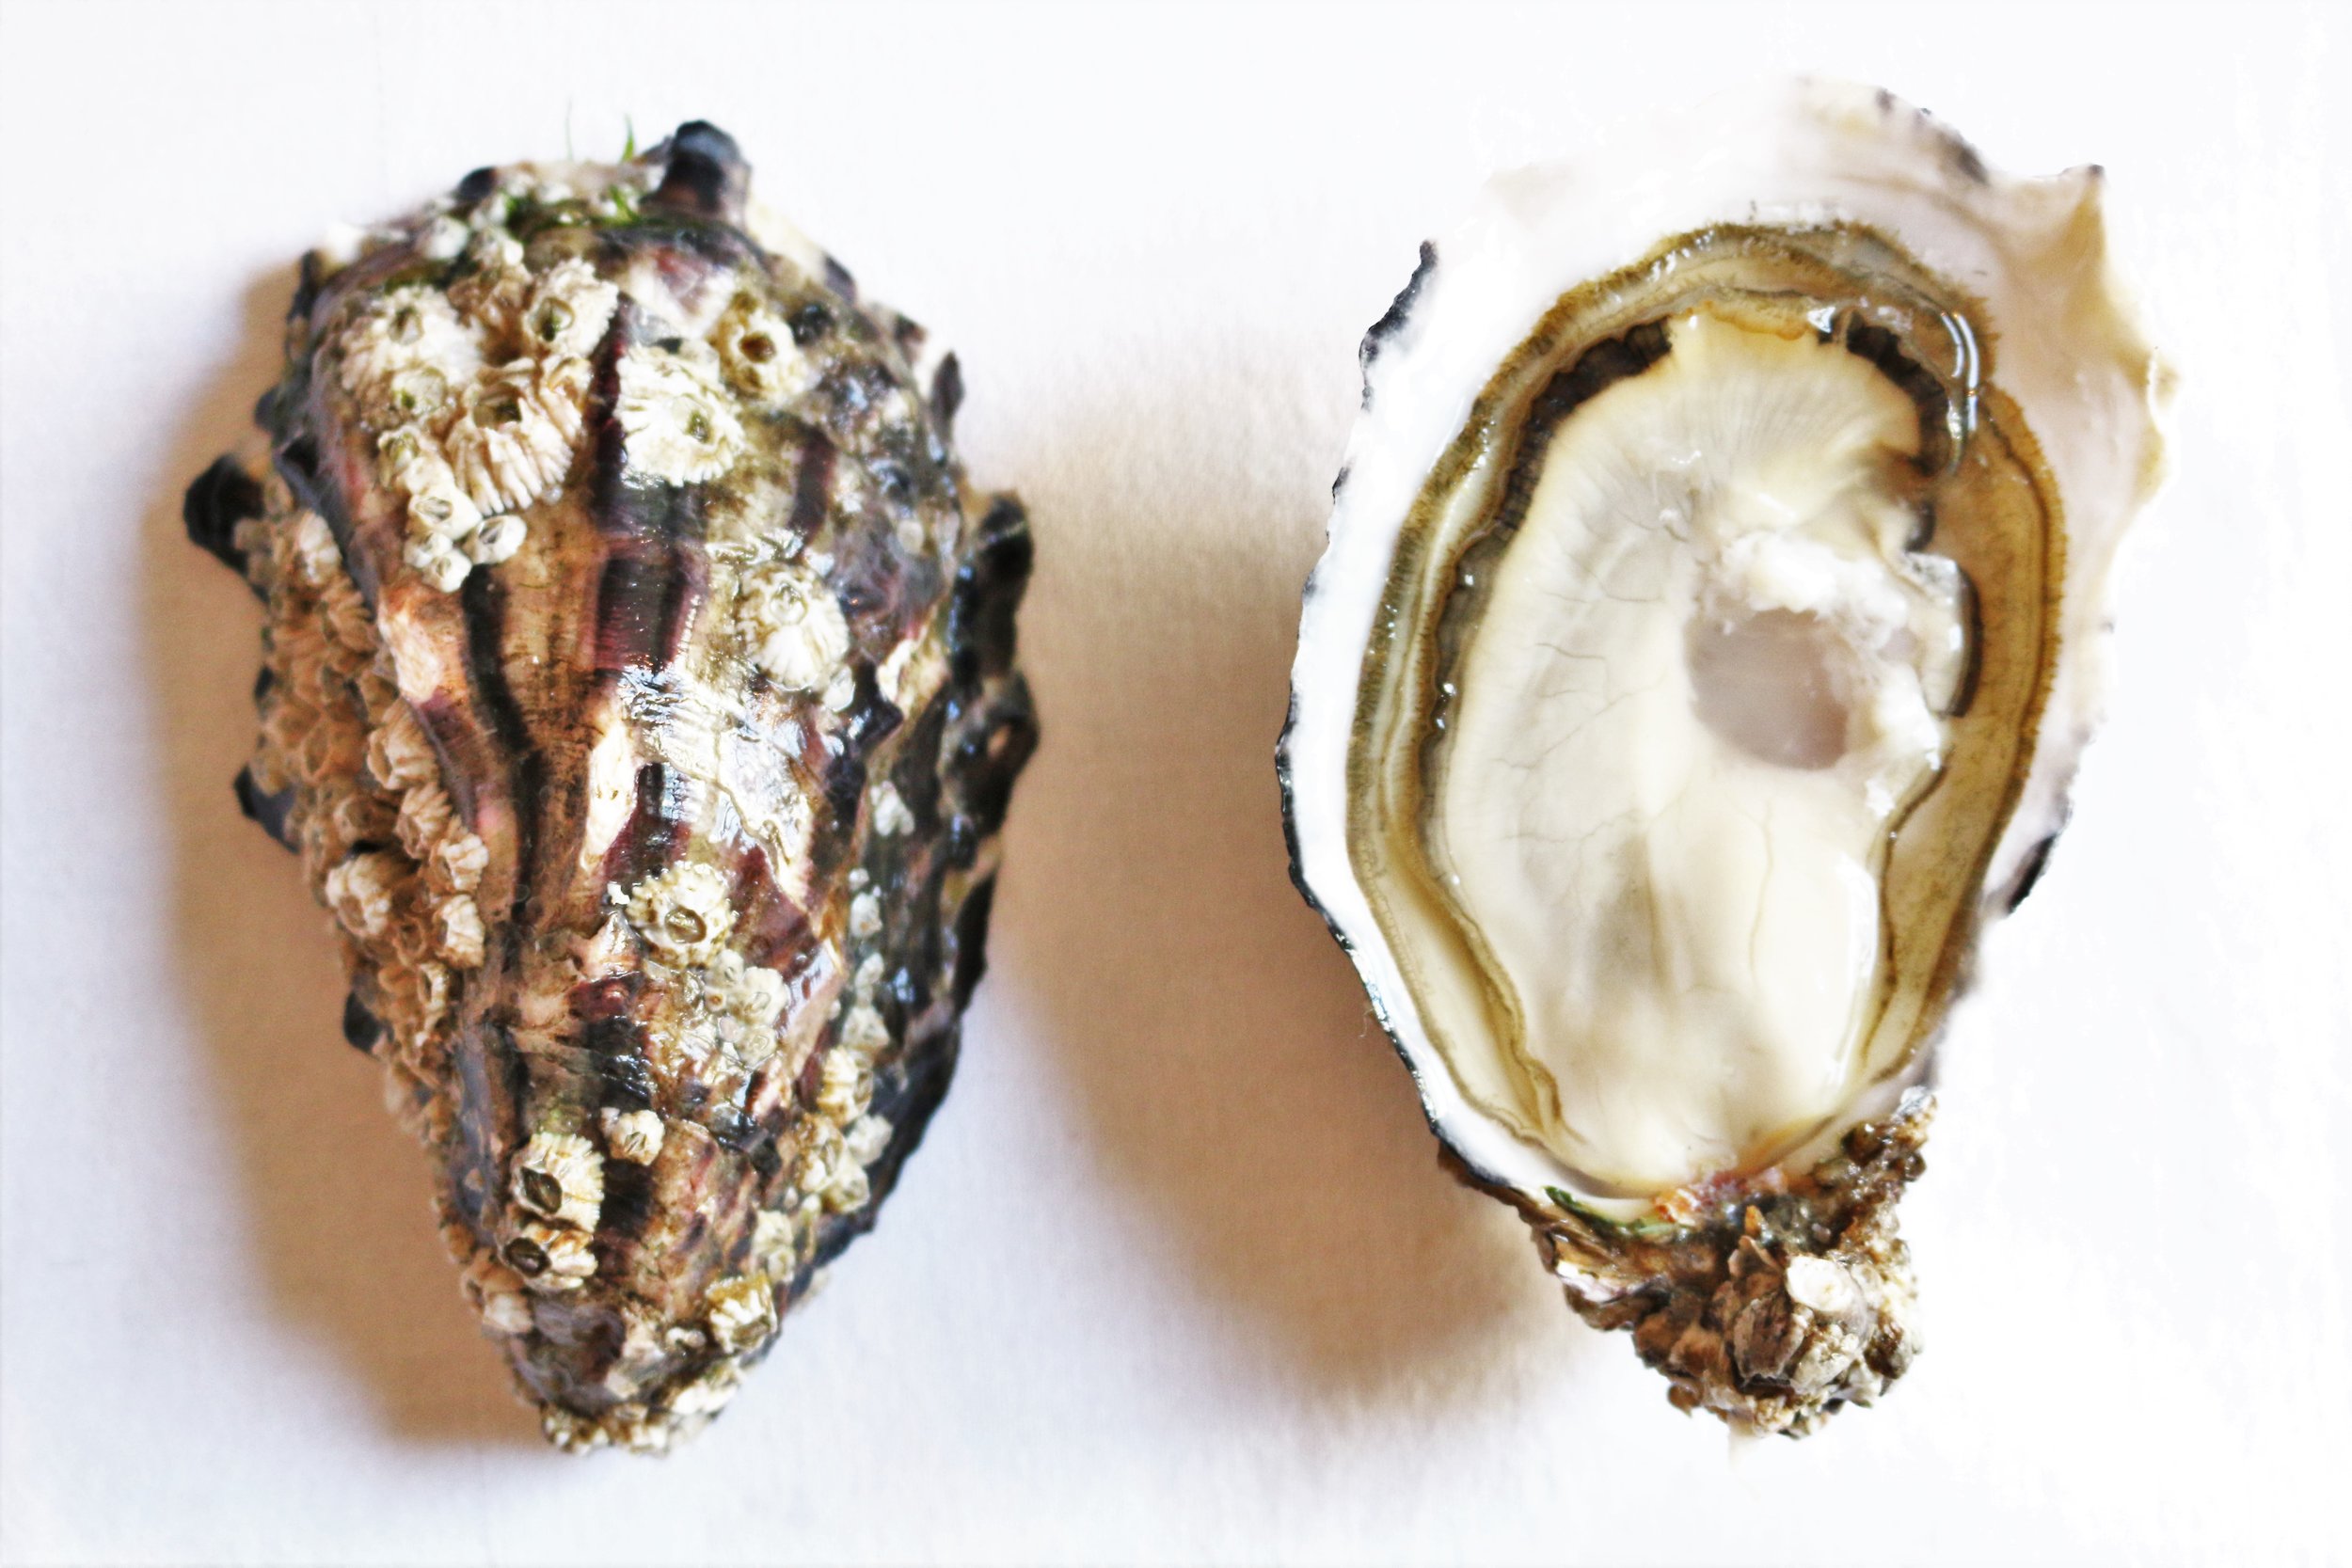   Name:&nbsp; Carlingford Oyster   Species: &nbsp;Crassostrea gigas   Location: &nbsp;Carlingford Lough, Carlingford, Co Louth, Ireland   Merroir:&nbsp;&nbsp;   Carlingford Lough has a huge exchange of water with each tide which provides the nutrient